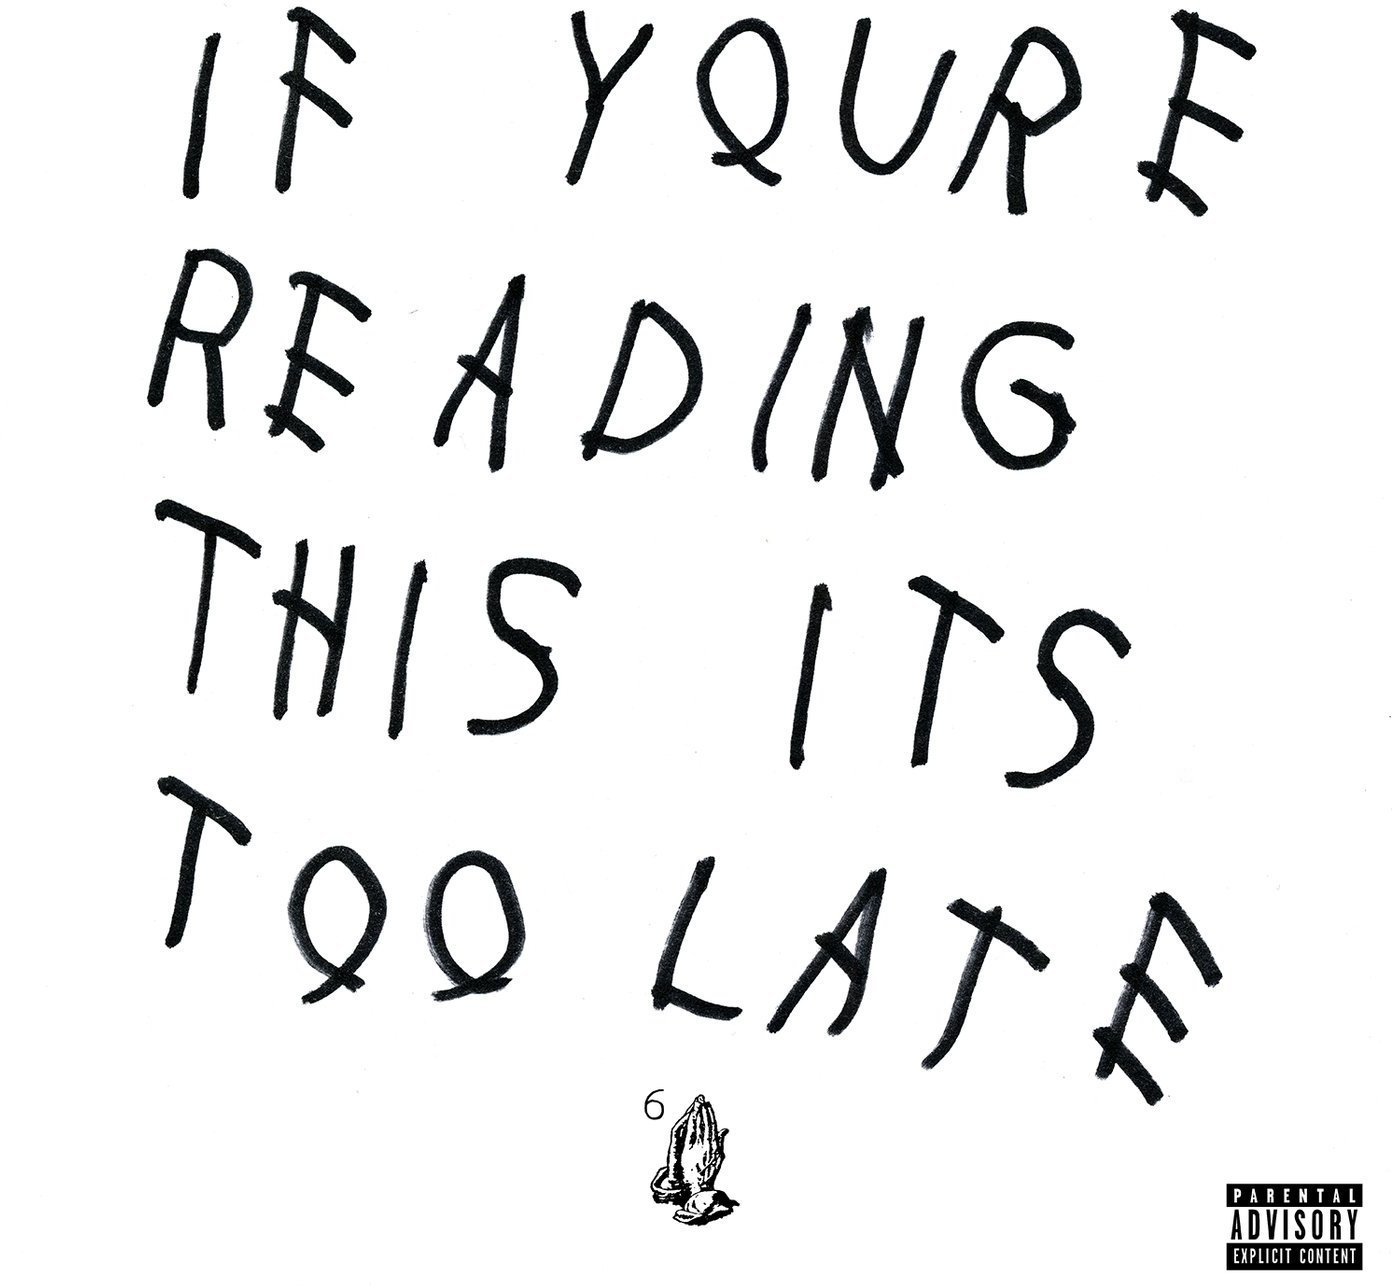 LP deska Drake - If You're Reading This It's Too Late (2 LP)